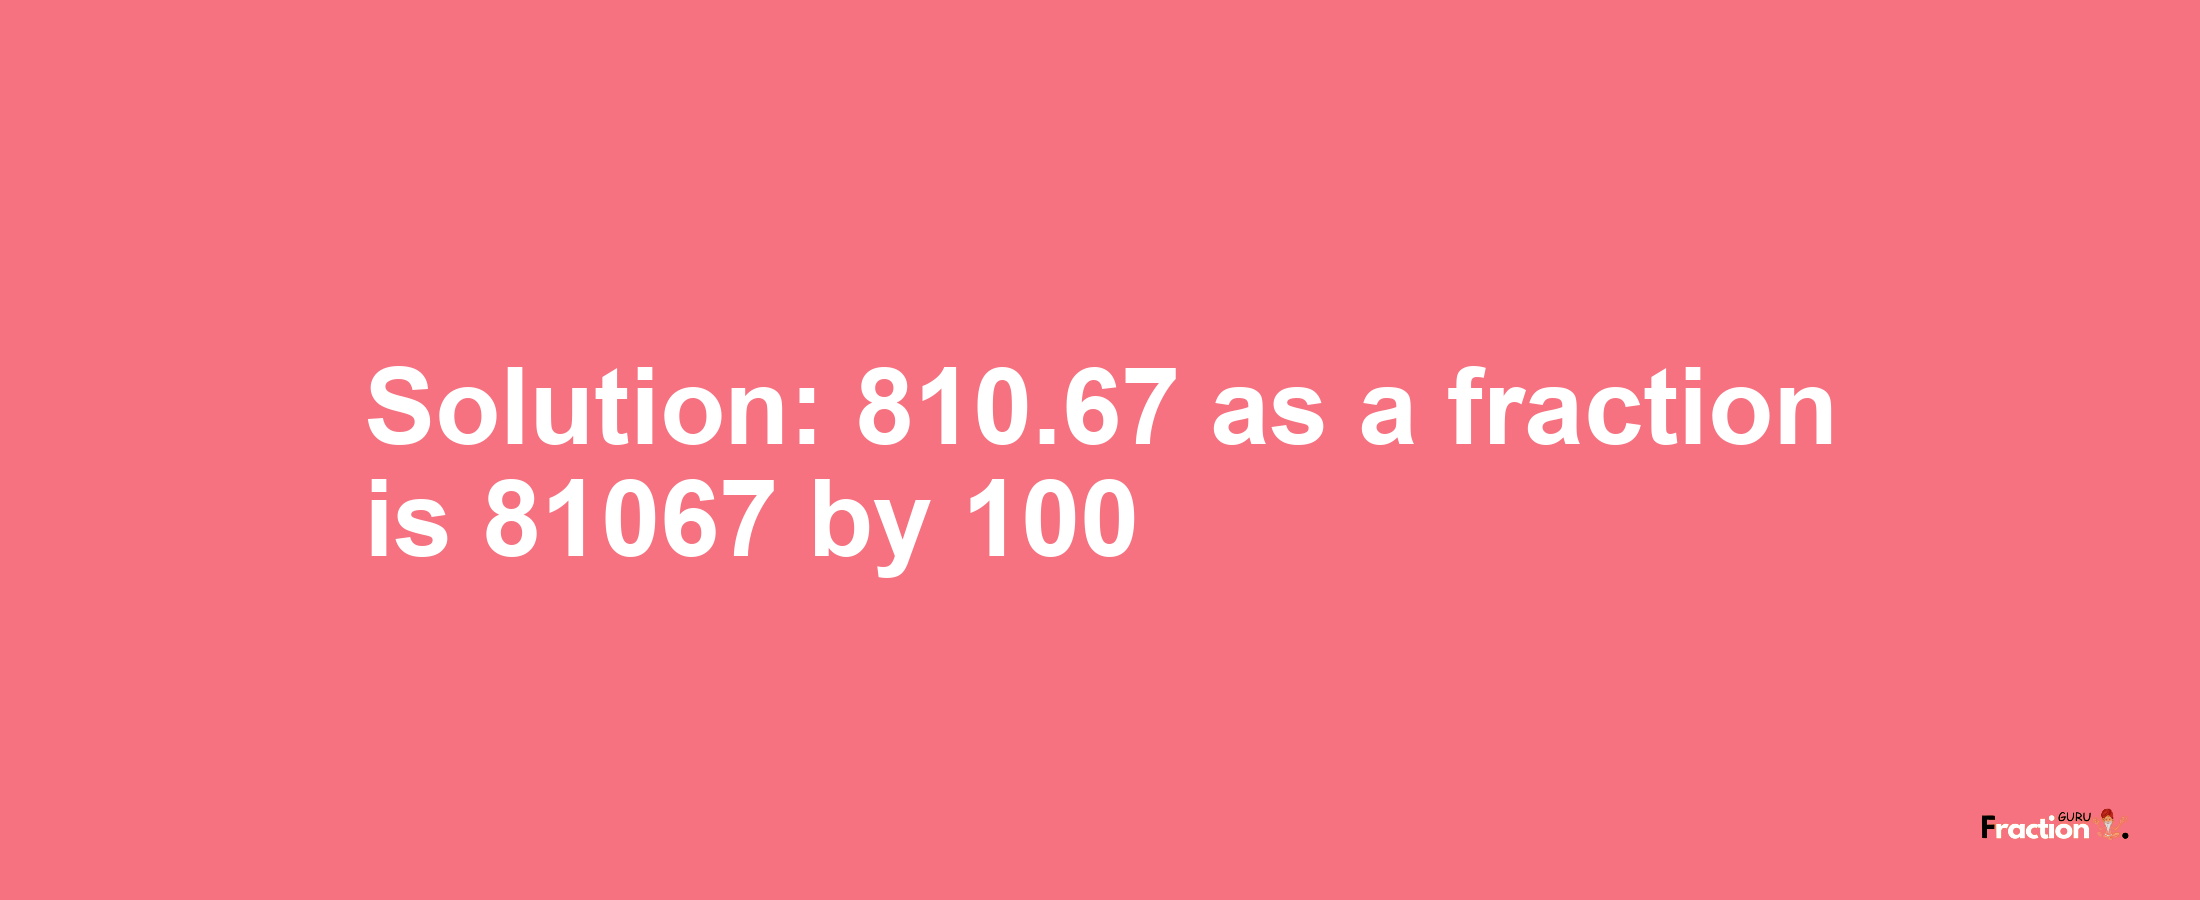 Solution:810.67 as a fraction is 81067/100